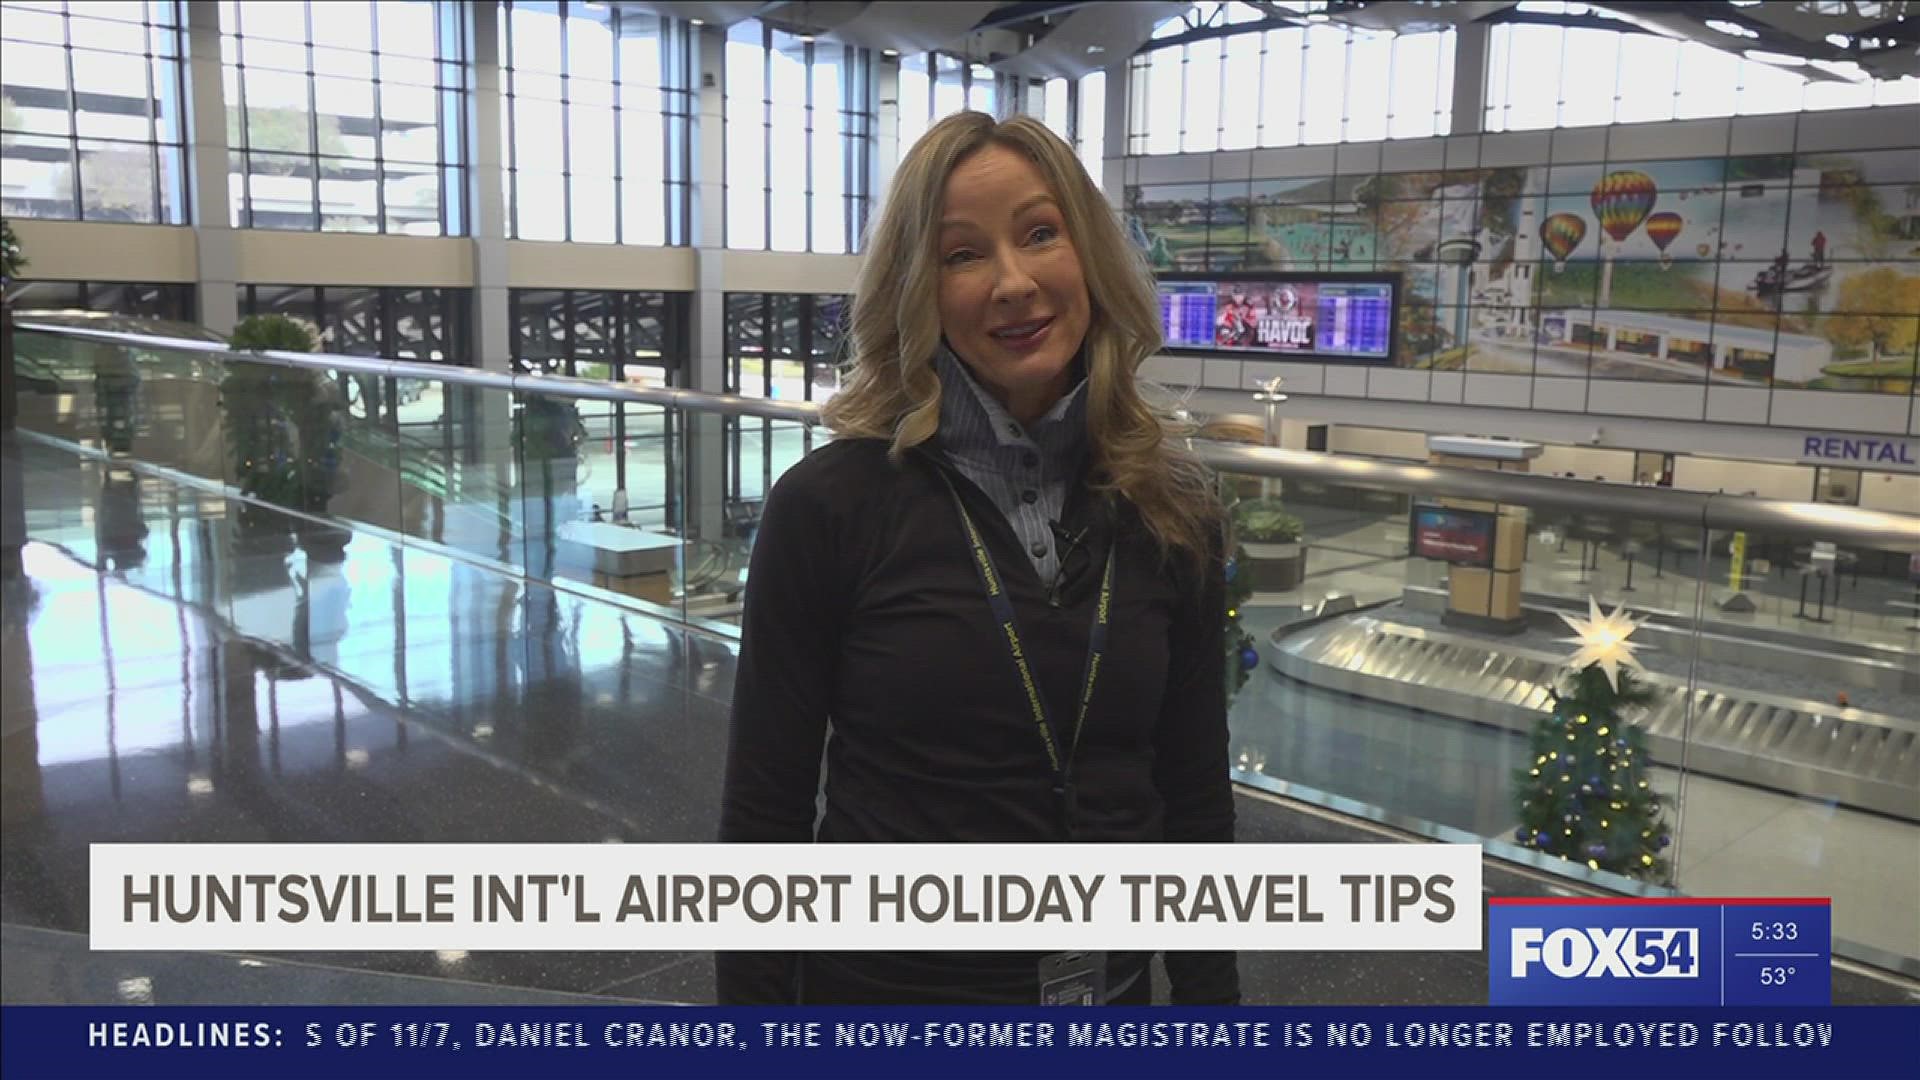 Huntsville International Airport shares some tips on how to travel safely during the holiday season with FOX54's Reporter Ken McCoy.